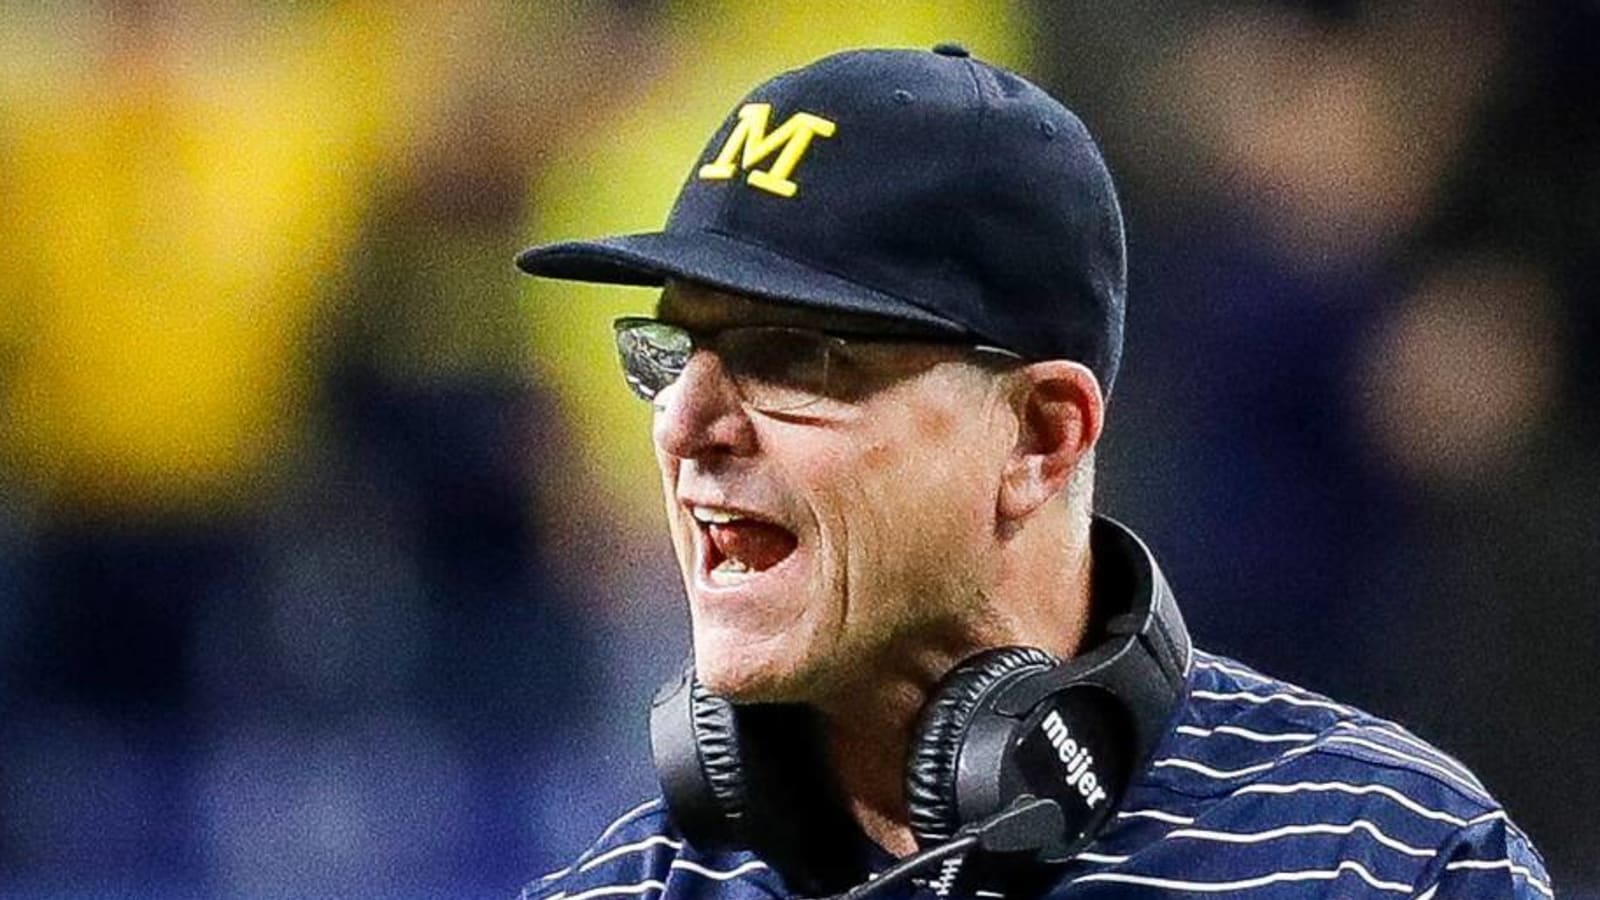 Michigan player says Harbaugh's presence is like an 'immovable object'